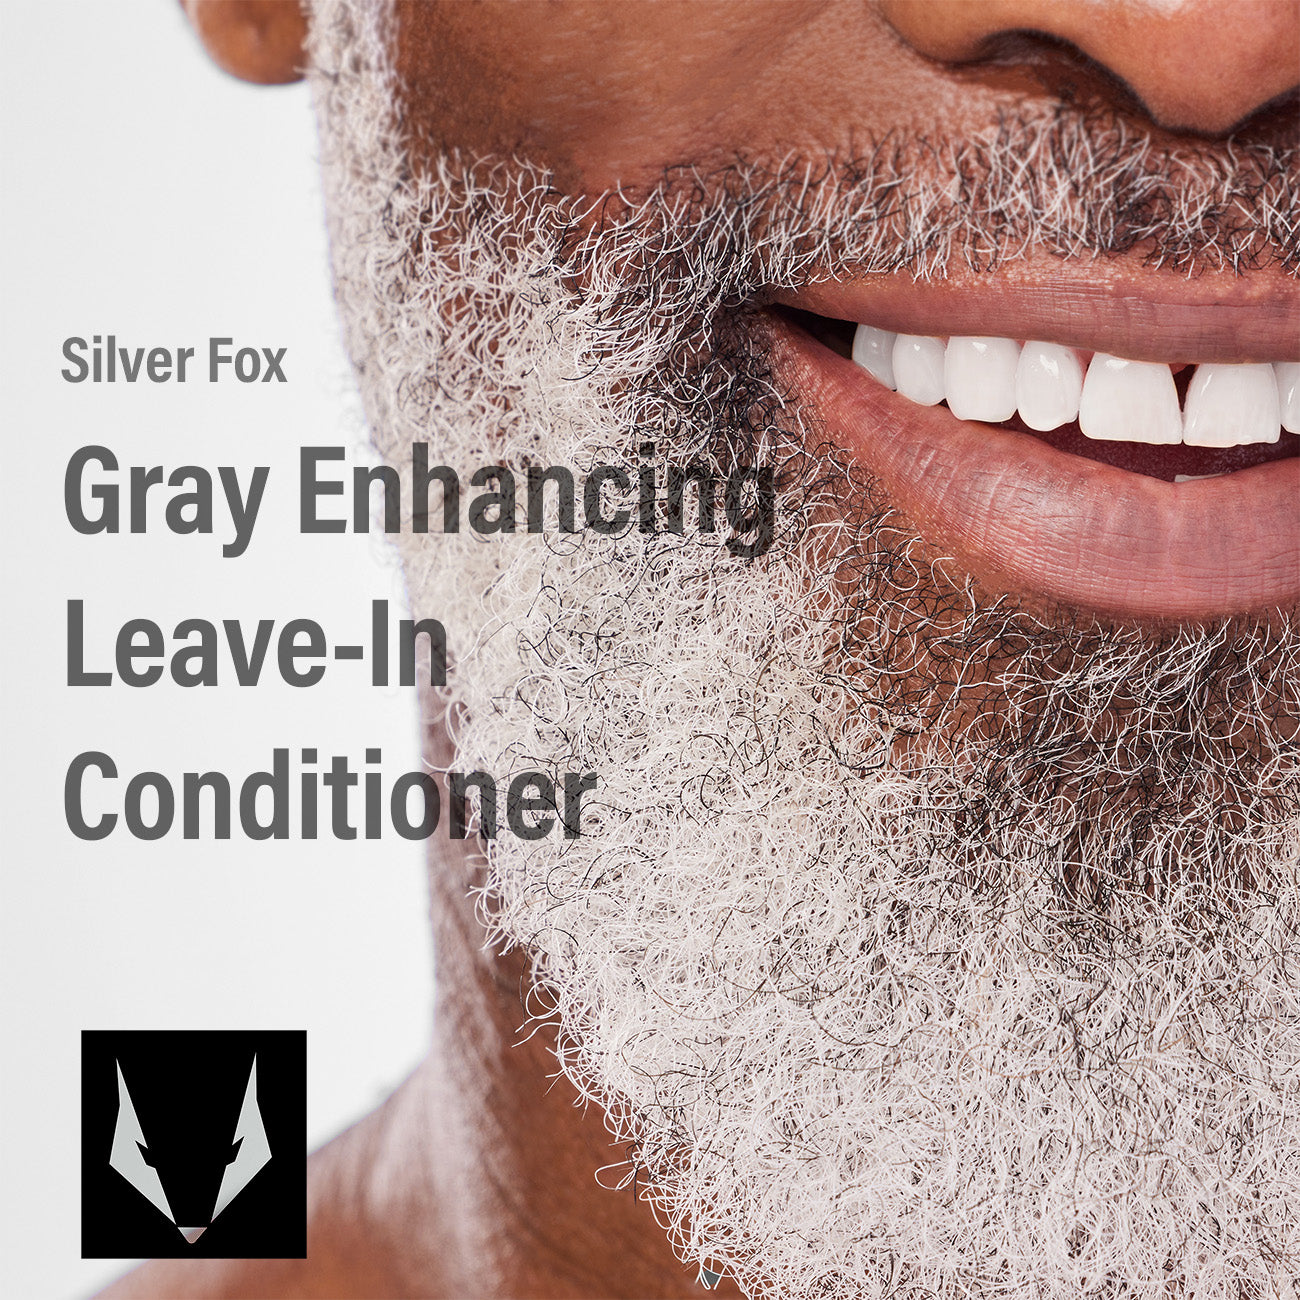 Man with gray beard using leave in conditioner